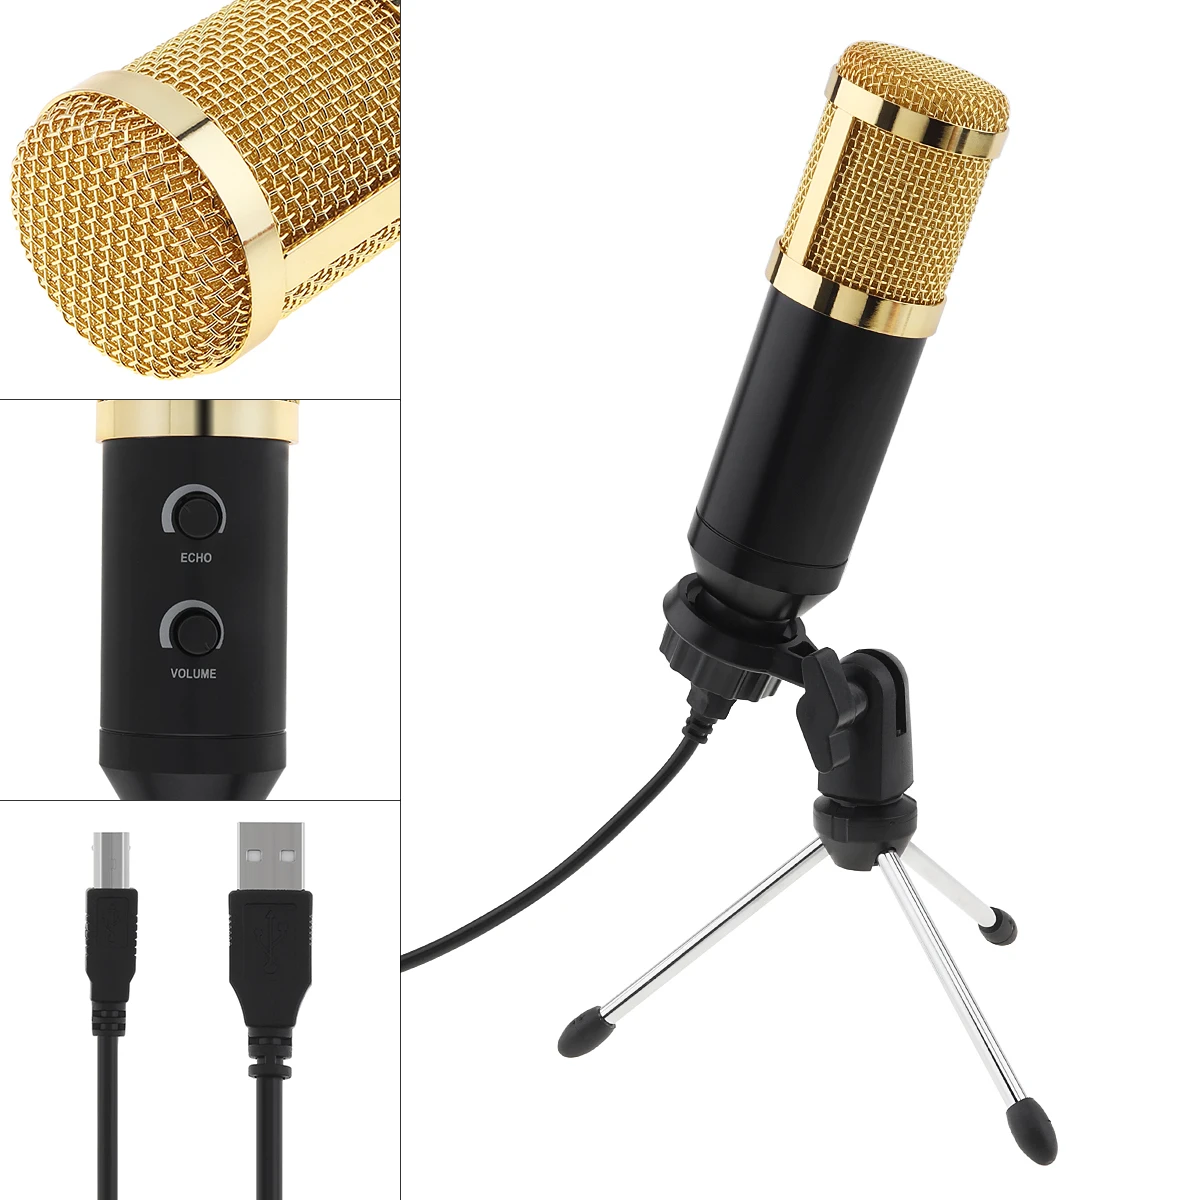 Metal Recording Microphone with Sound Card Function with Stand Professional Condenser Studio Live Broadcasting Microphone enlarge